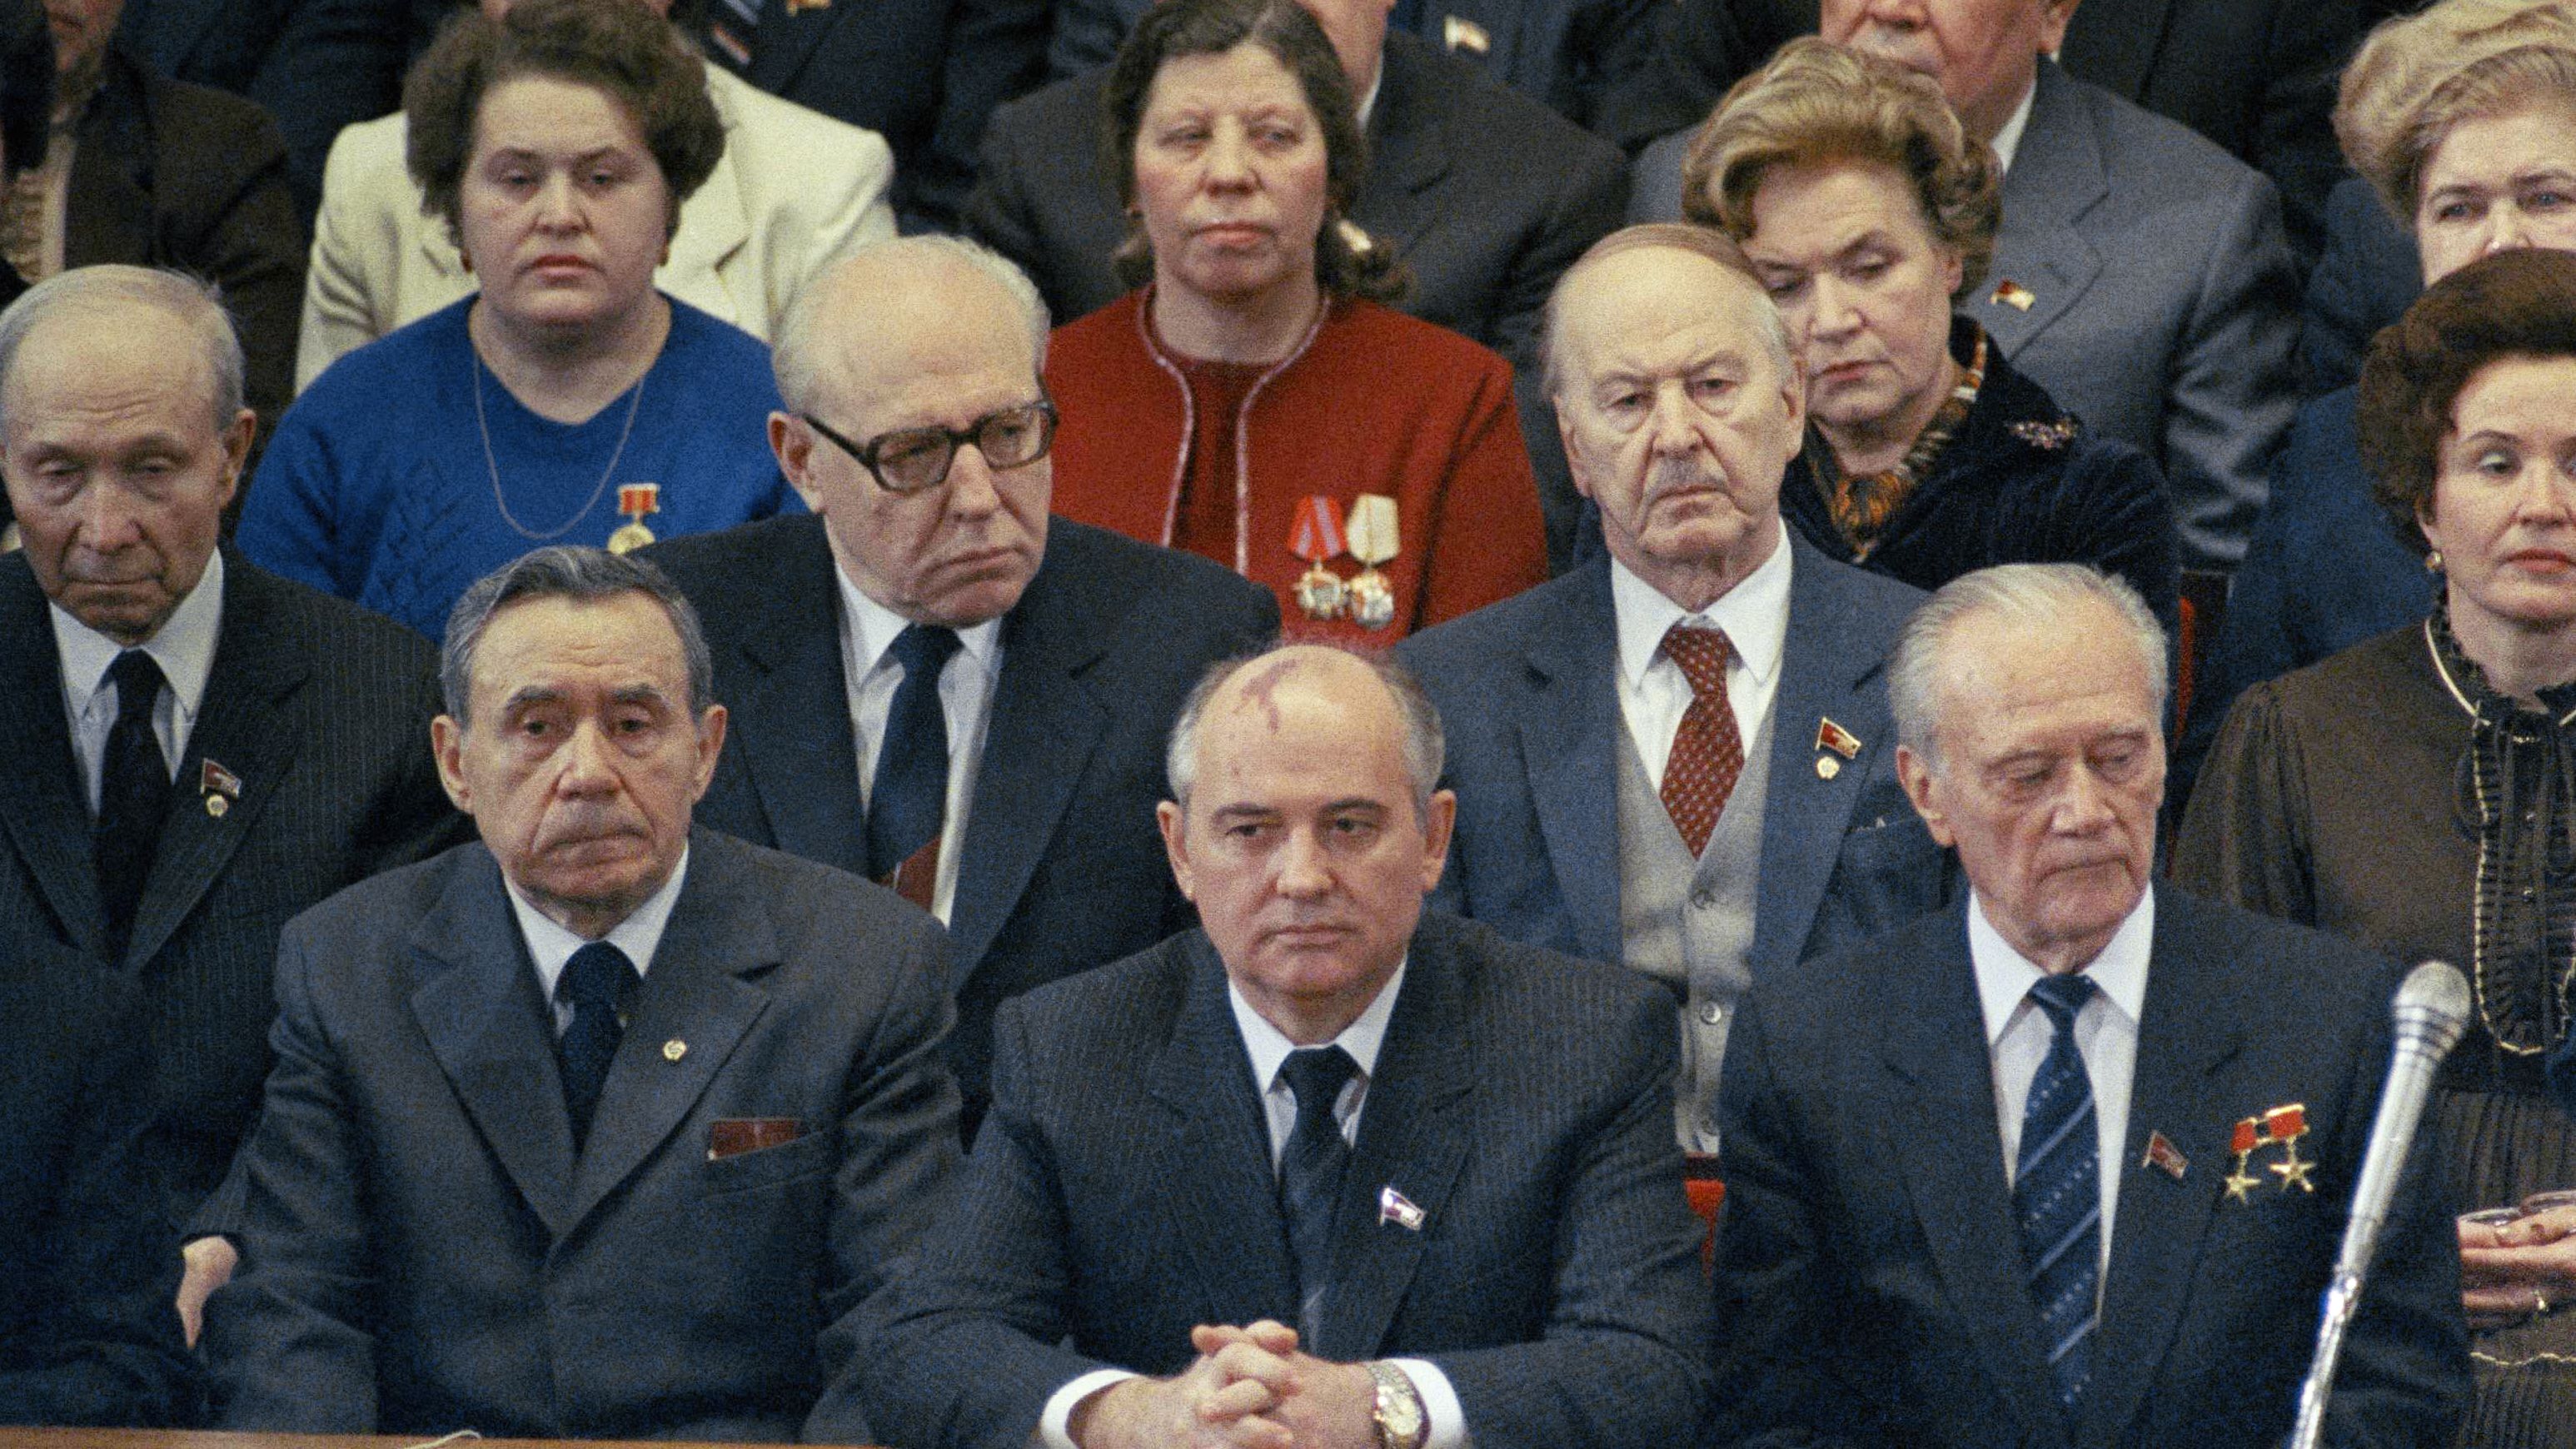 Gorbachev, front center, attends an International Women's Day Gala in Moscow in March 1985. He became a full Politburo member in 1980, and he rose to the top party spot in 1985. That effectively made him the leader of the Soviet Union.